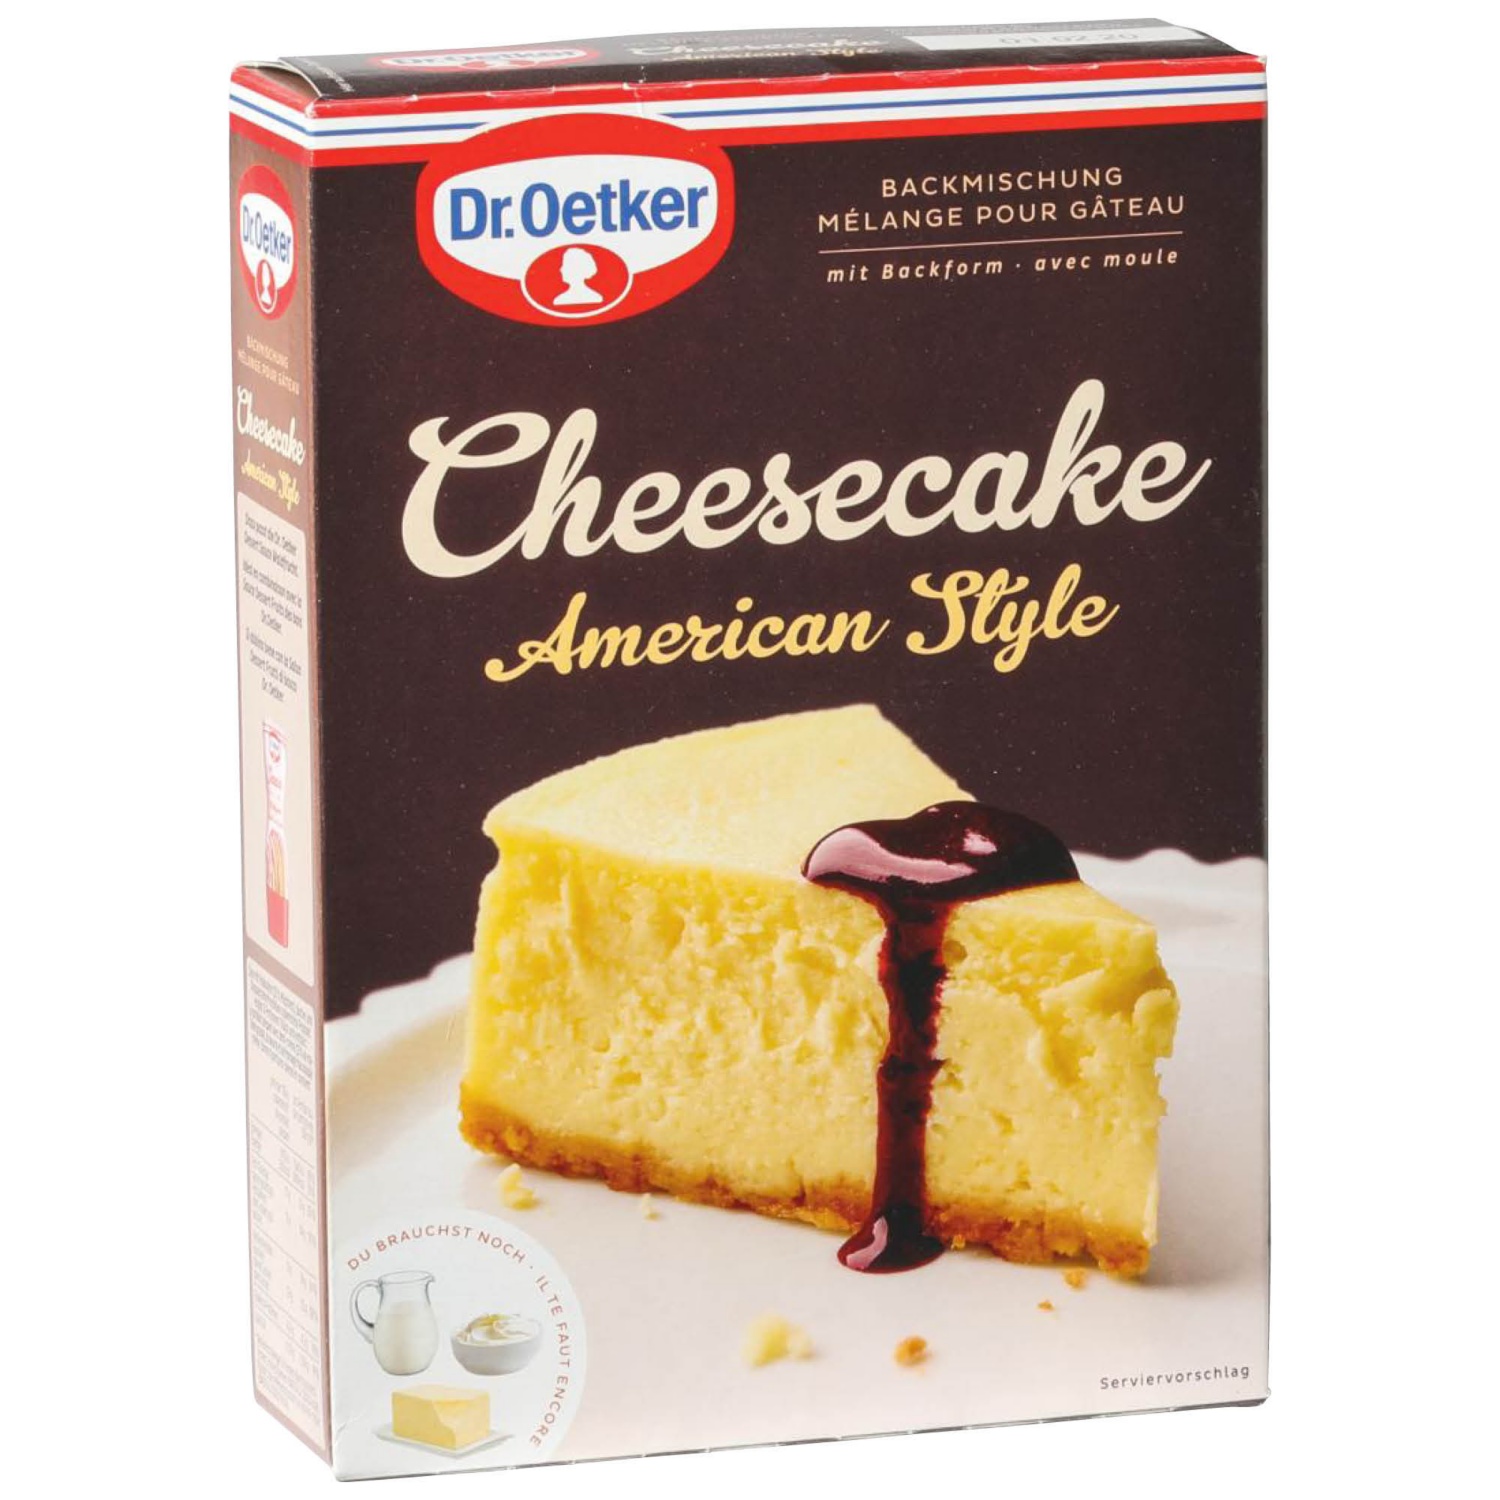 DR. OETKER Qualité Confiserie, Cheescake American Style